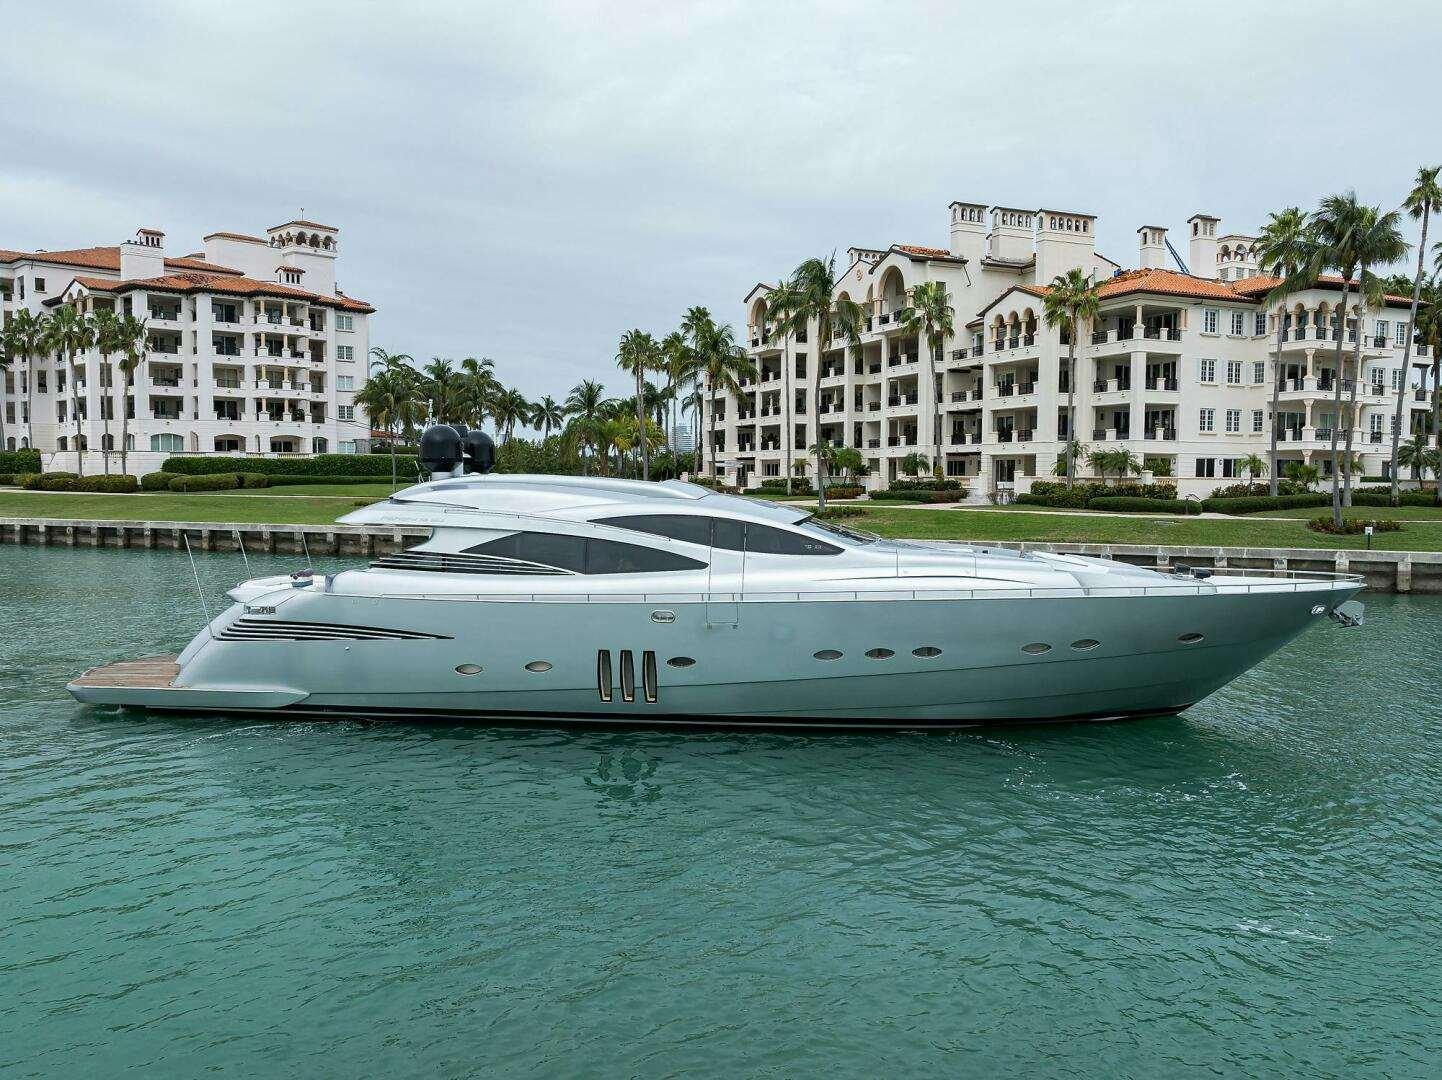 Miura
Yacht for Sale